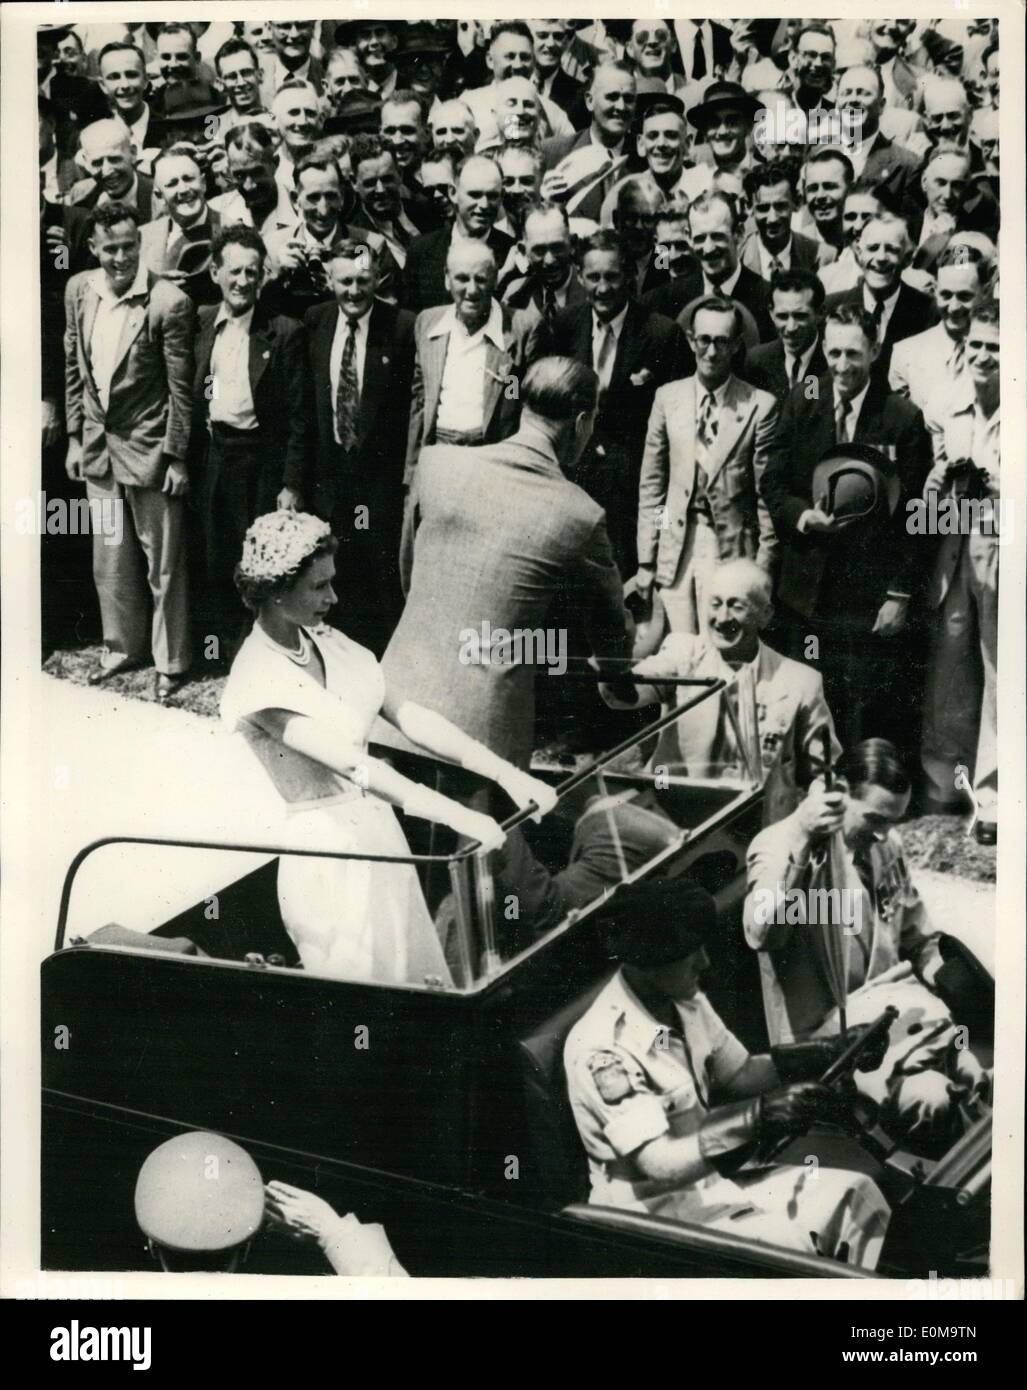 Mar. 03, 1954 - Royal Austalian tour original pictures rally of ex-servicemen in Brisbane. Photo shows the scene as H.R.H. the Duke of Edinburgh shakes hands with 73 year old Bill McLennon as the Queen holds on to the rail of the open truck during the rally of Ex-servicemen in Brisbane. Stock Photo